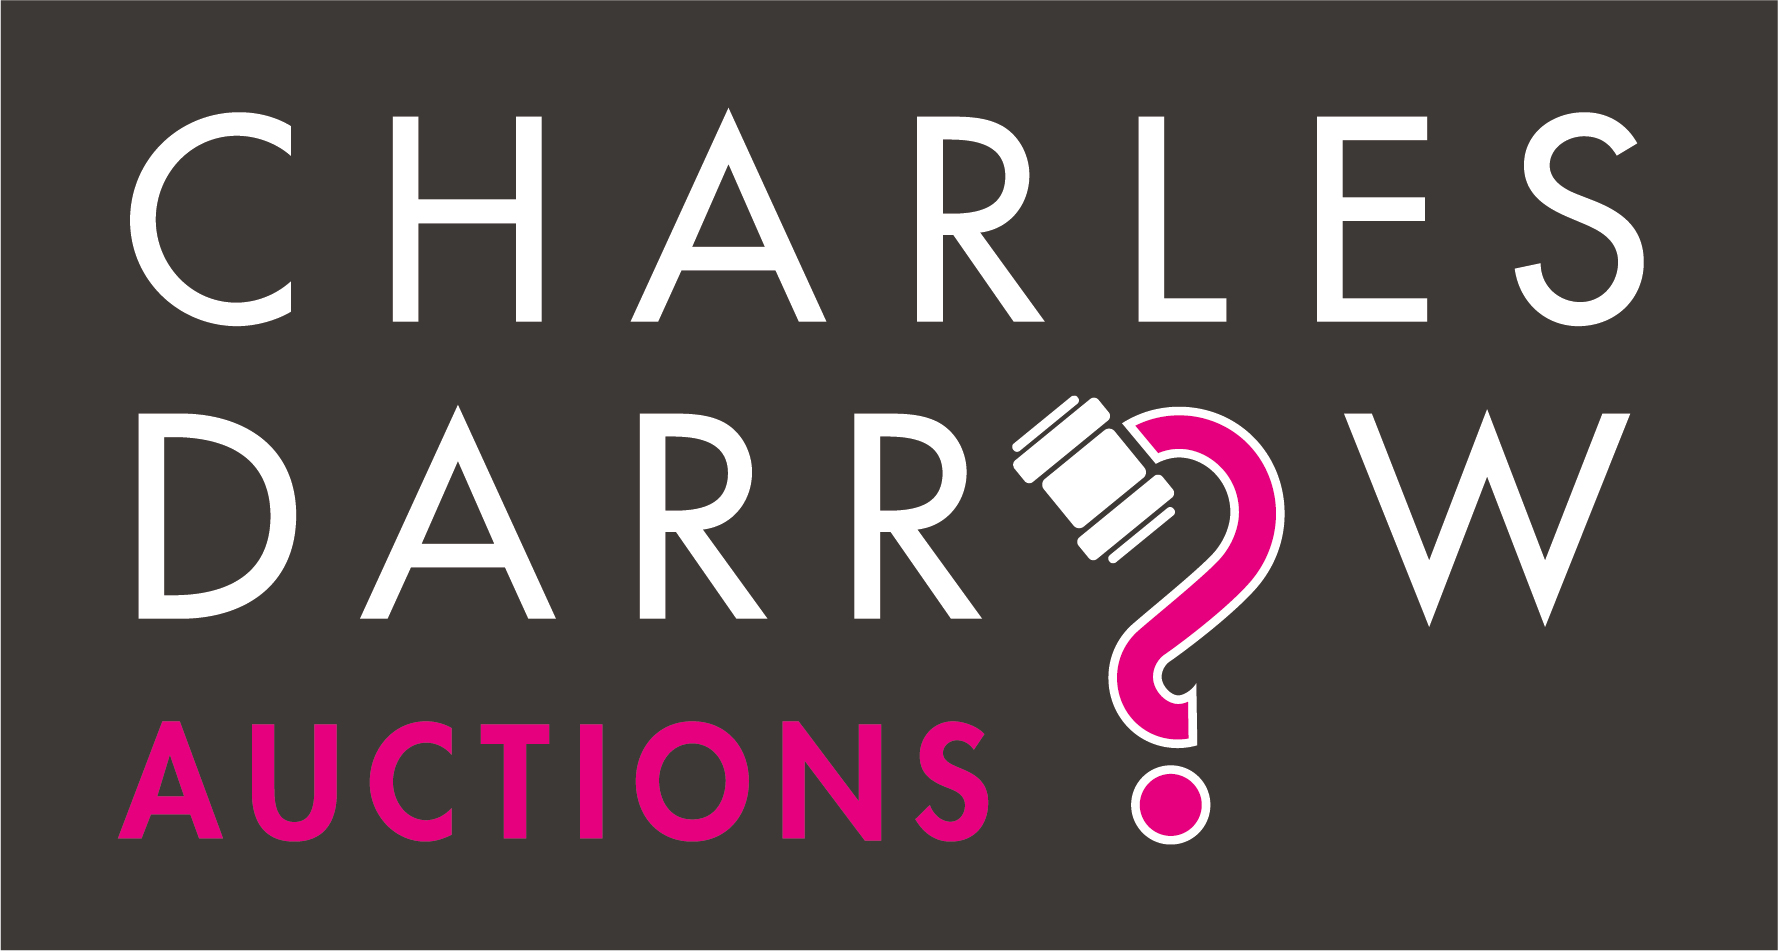 Please contact Charles Darrow Network Auctions on 01305 302222.